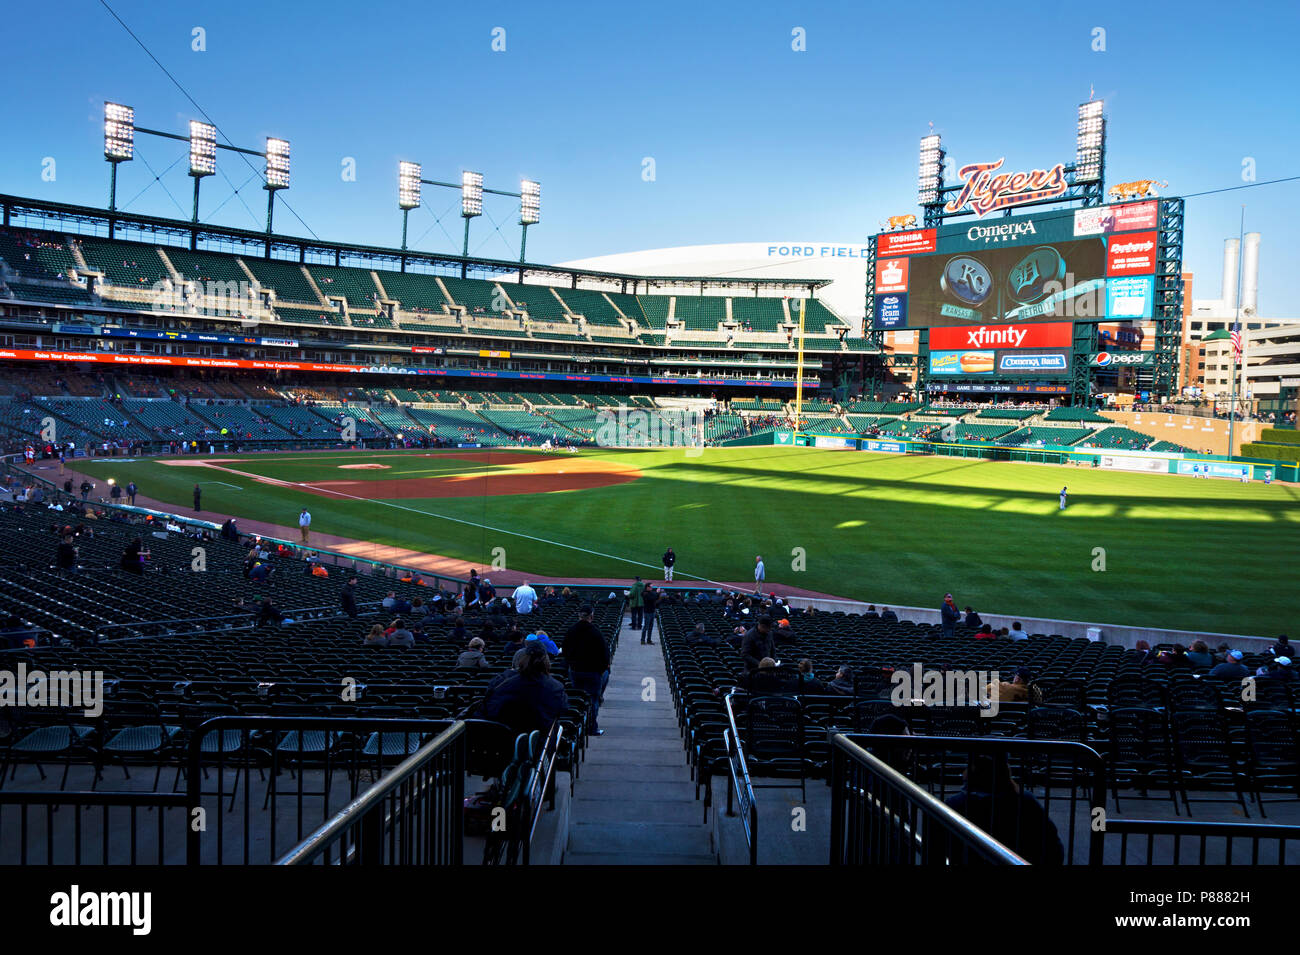 Comercia park baseball arena in Detroit Michigan the home of Tigers Stock Photo